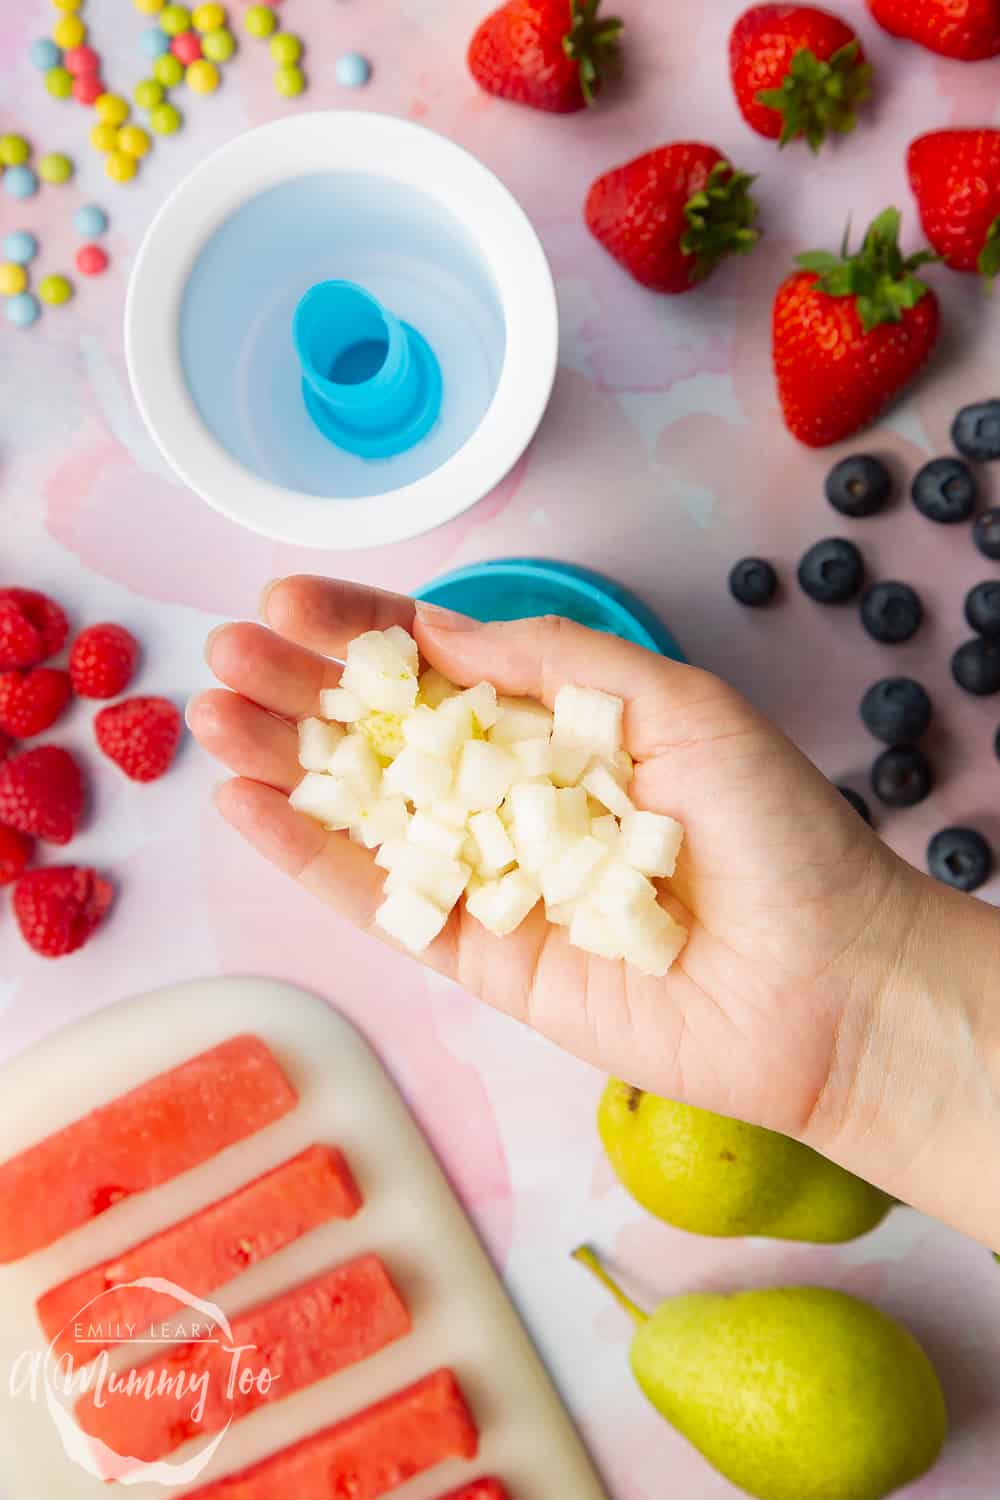 YoPop frozen yogurt maker open with a hand holding small pieces of pear with more fruit in the background.